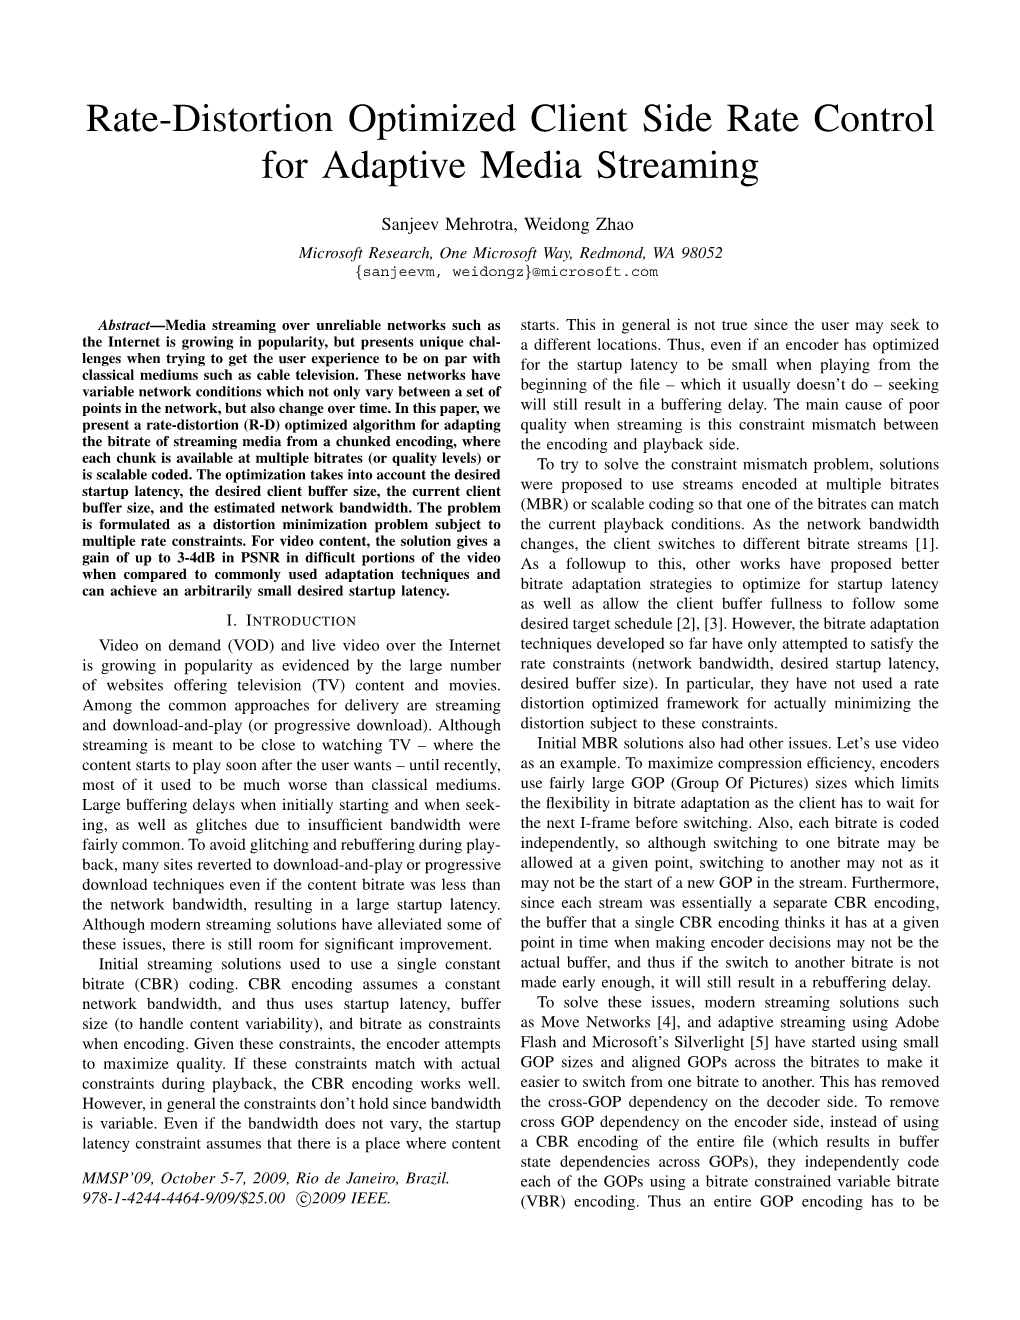 Rate-Distortion Optimized Client Side Rate Control for Adaptive Media Streaming